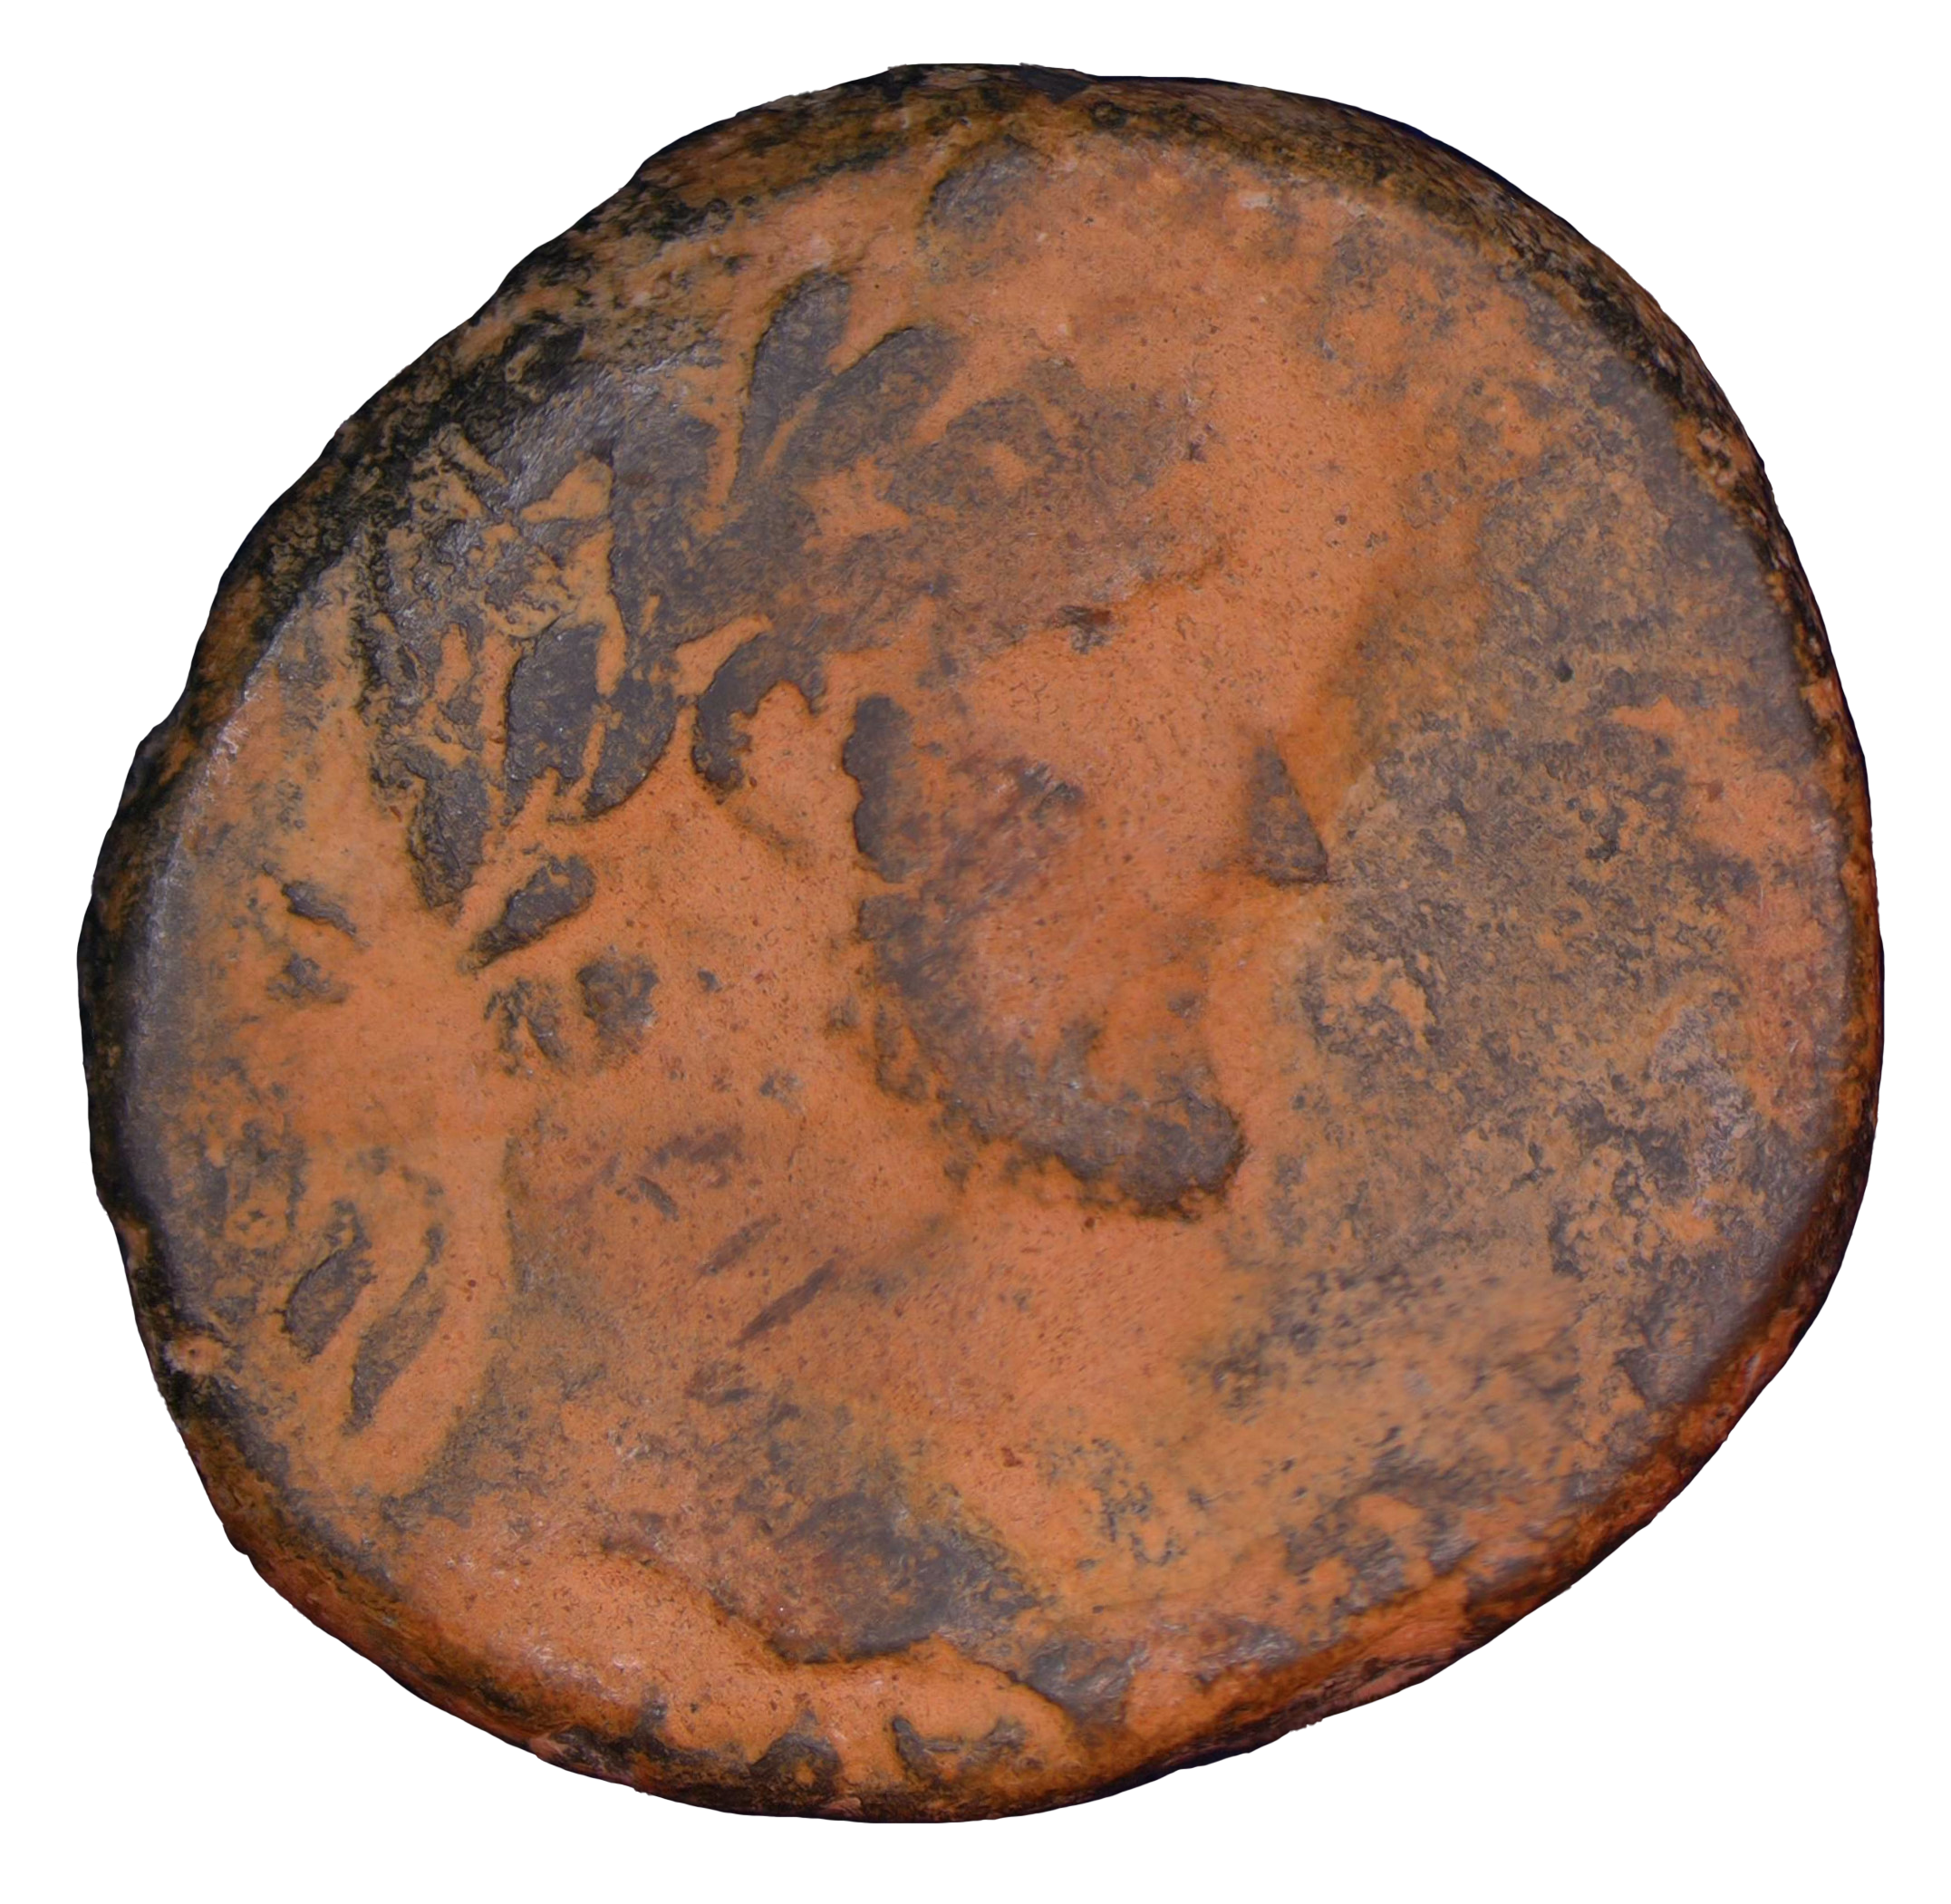 Cleaning an Antoninus Antioch Provincial with an orange “Desert Patina”